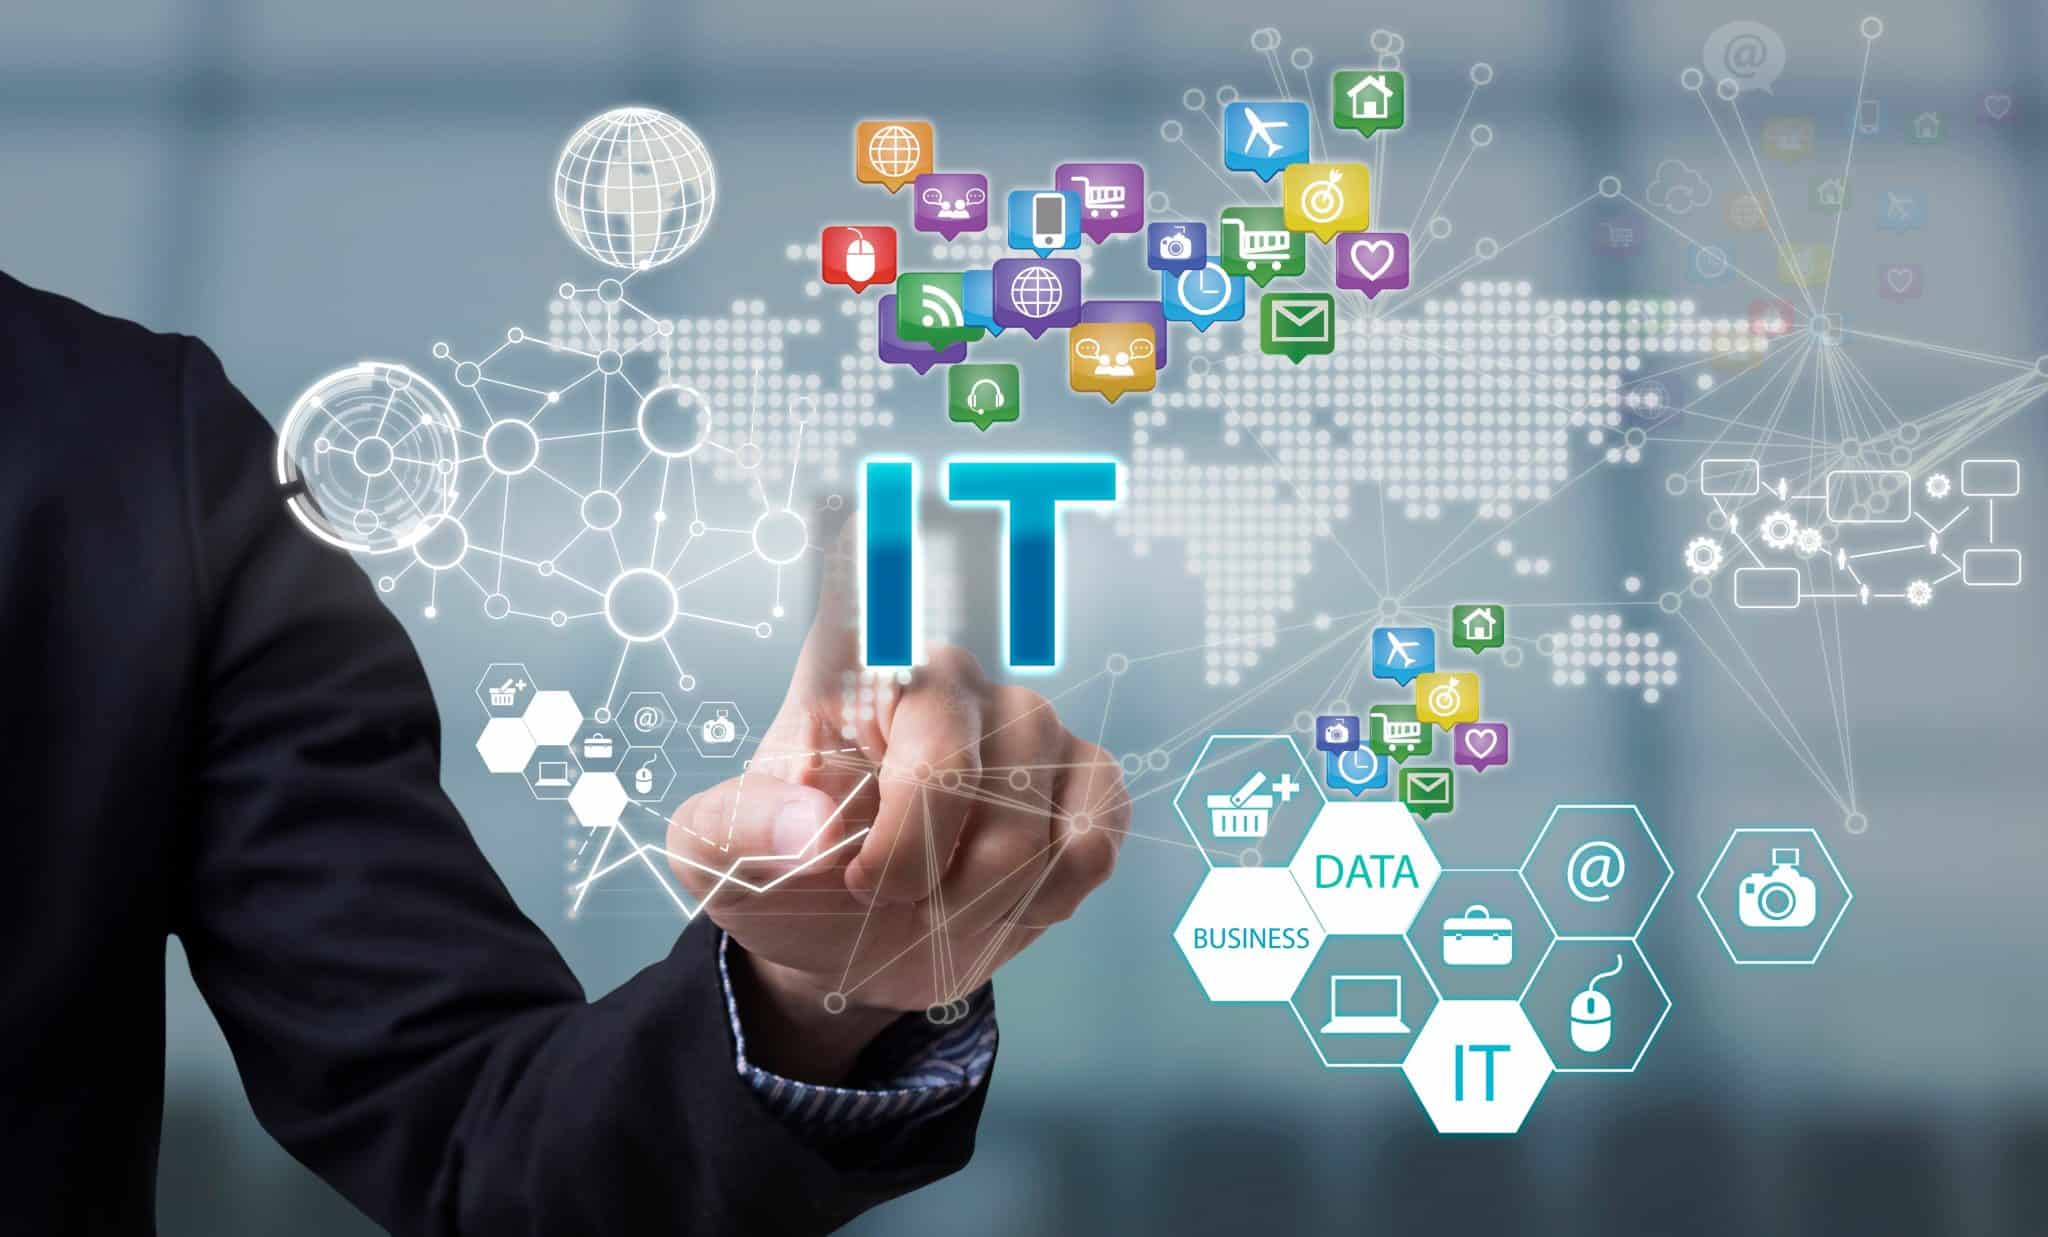 What Services Does an IT Company Typically Provide? - Revenues & Profits